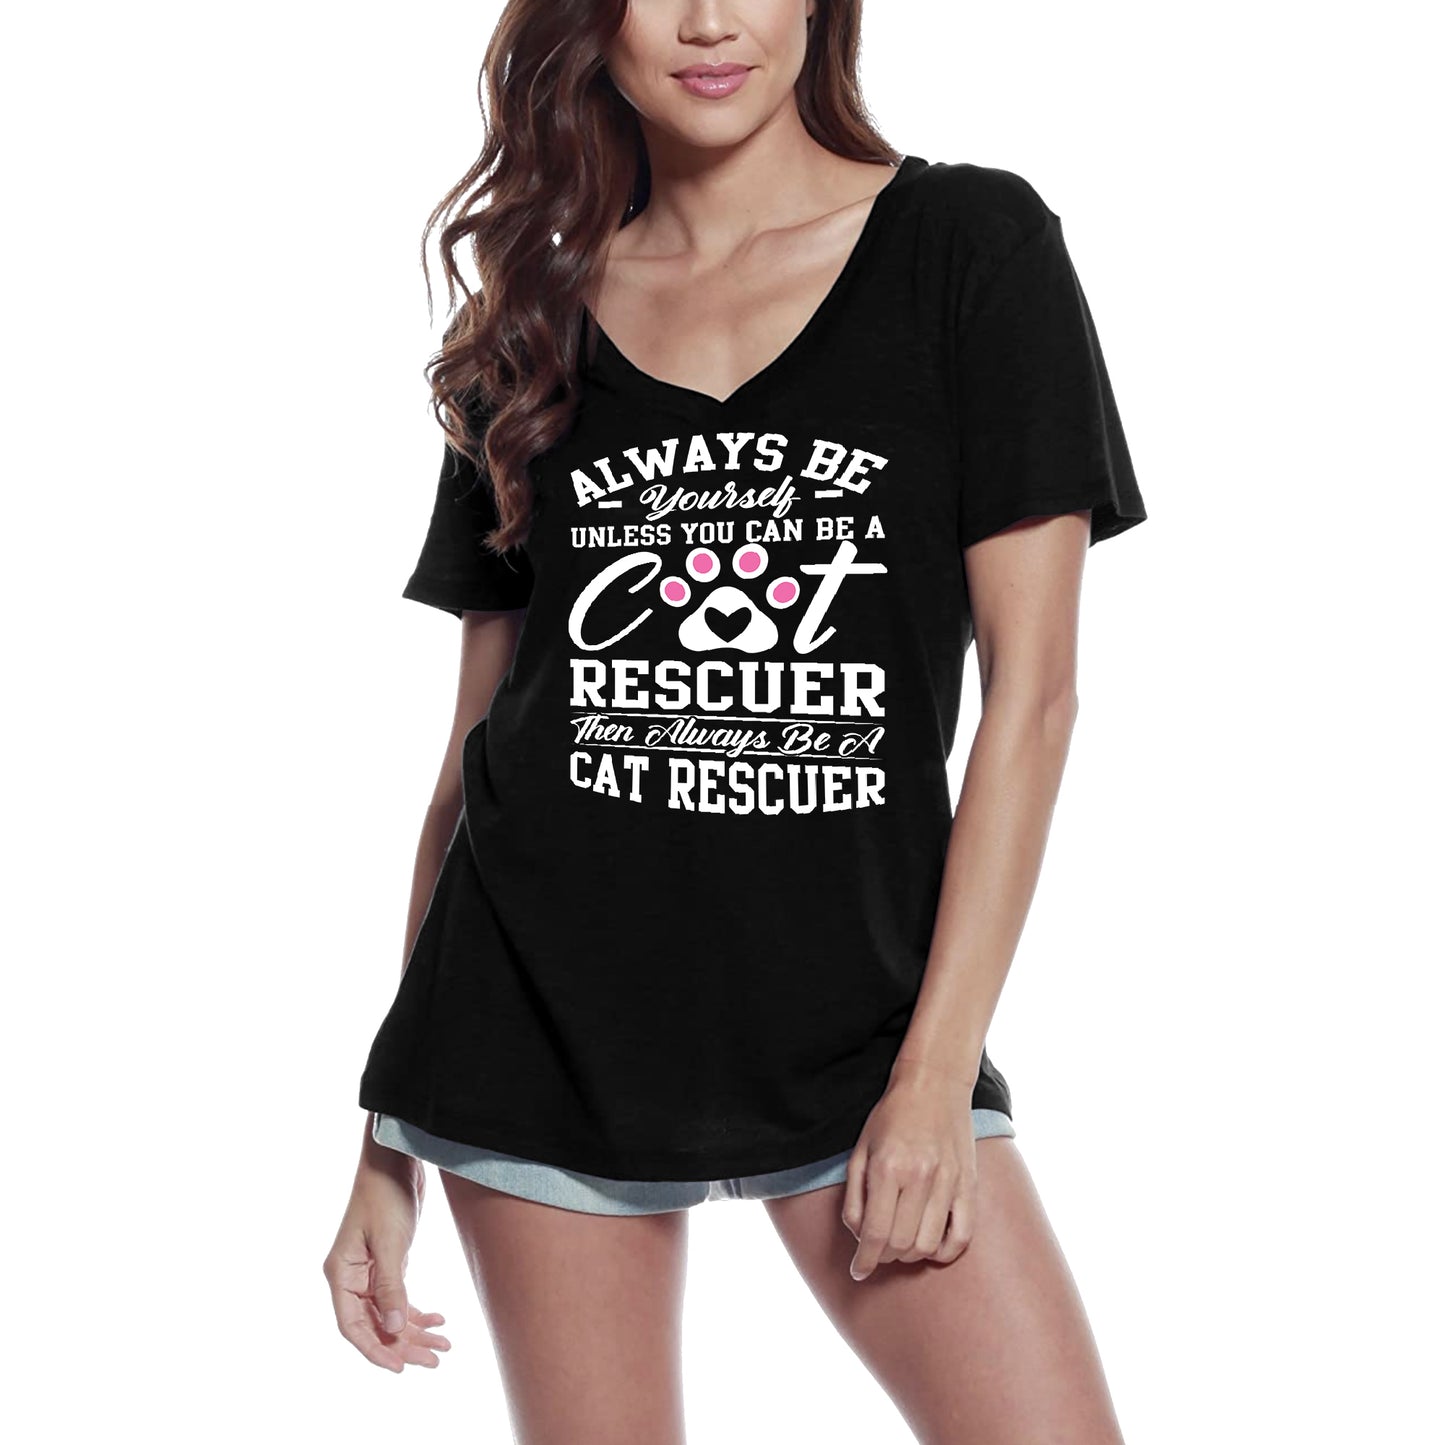 ULTRABASIC Women's T-Shirt Always Be Yourself Unless You Can Be Cat Rescuer - Funny Kitten Shirt for Cat Lovers